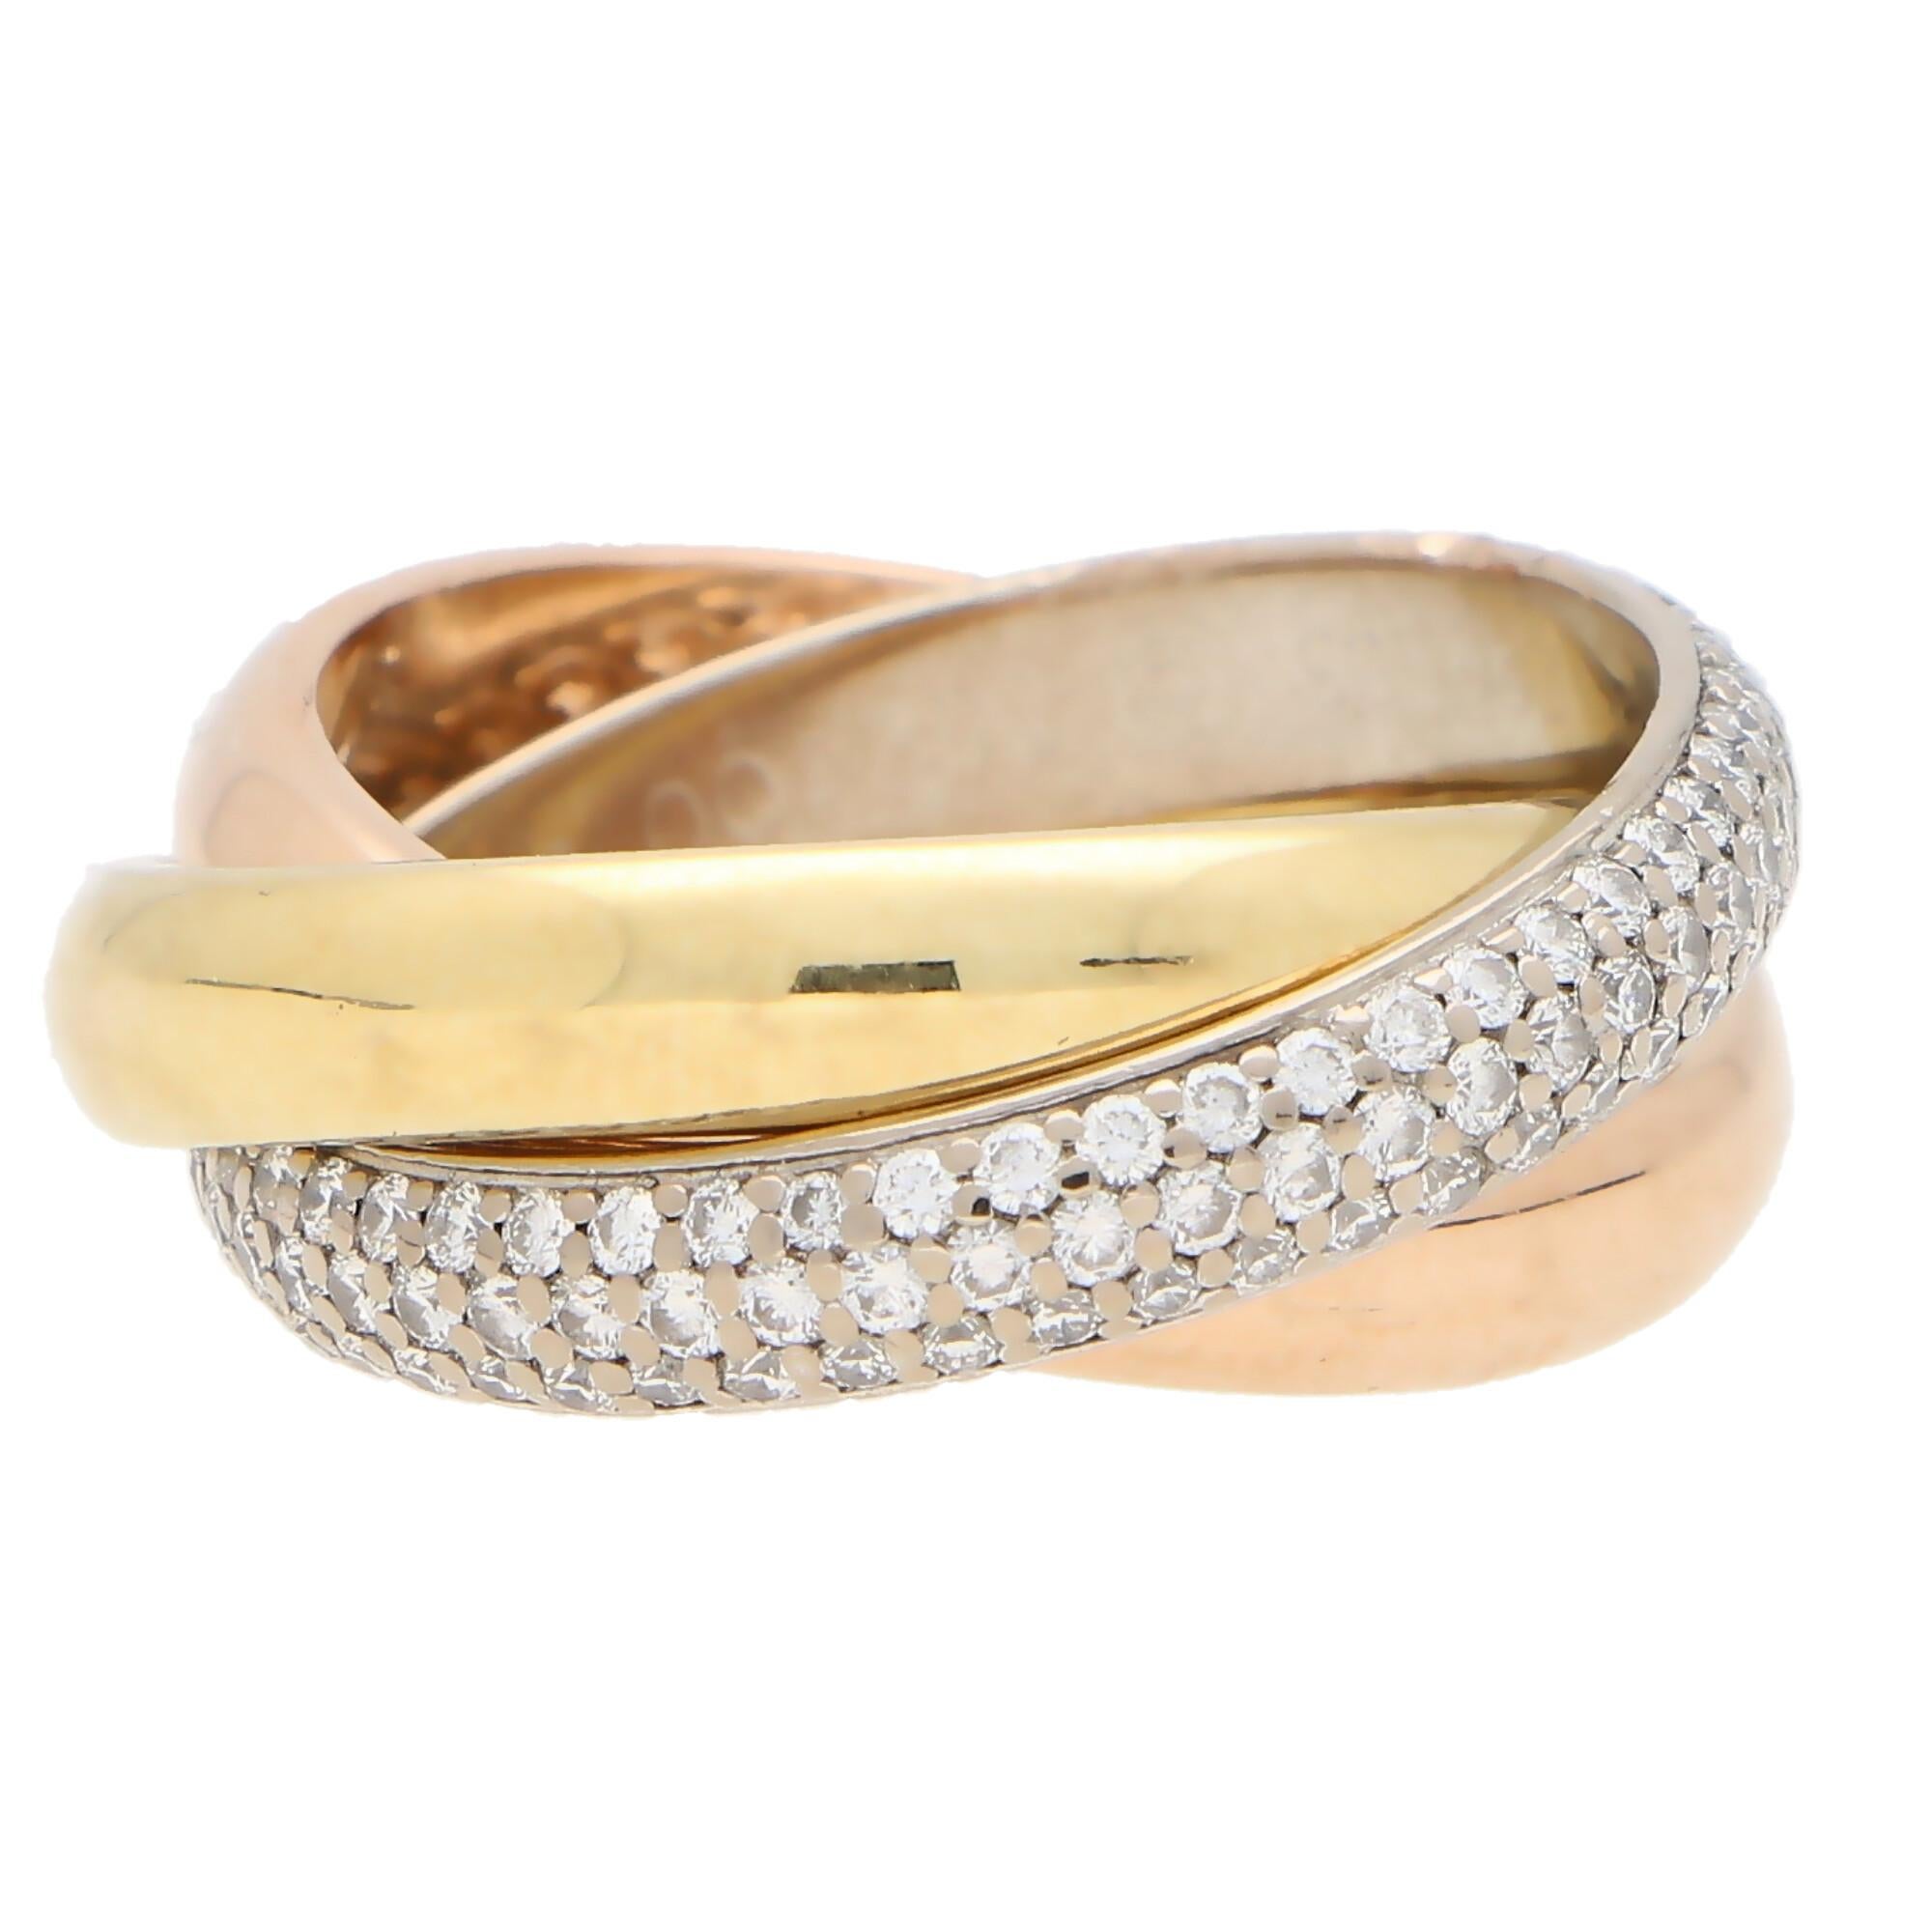 A classic Cartier diamond trinity ring set in 18k yellow, rose and white gold.

The ring is composed of three interlinked 4-millimetre bands that are designed to roll with ease on the finger. The colour difference is subtle yet beautiful and the